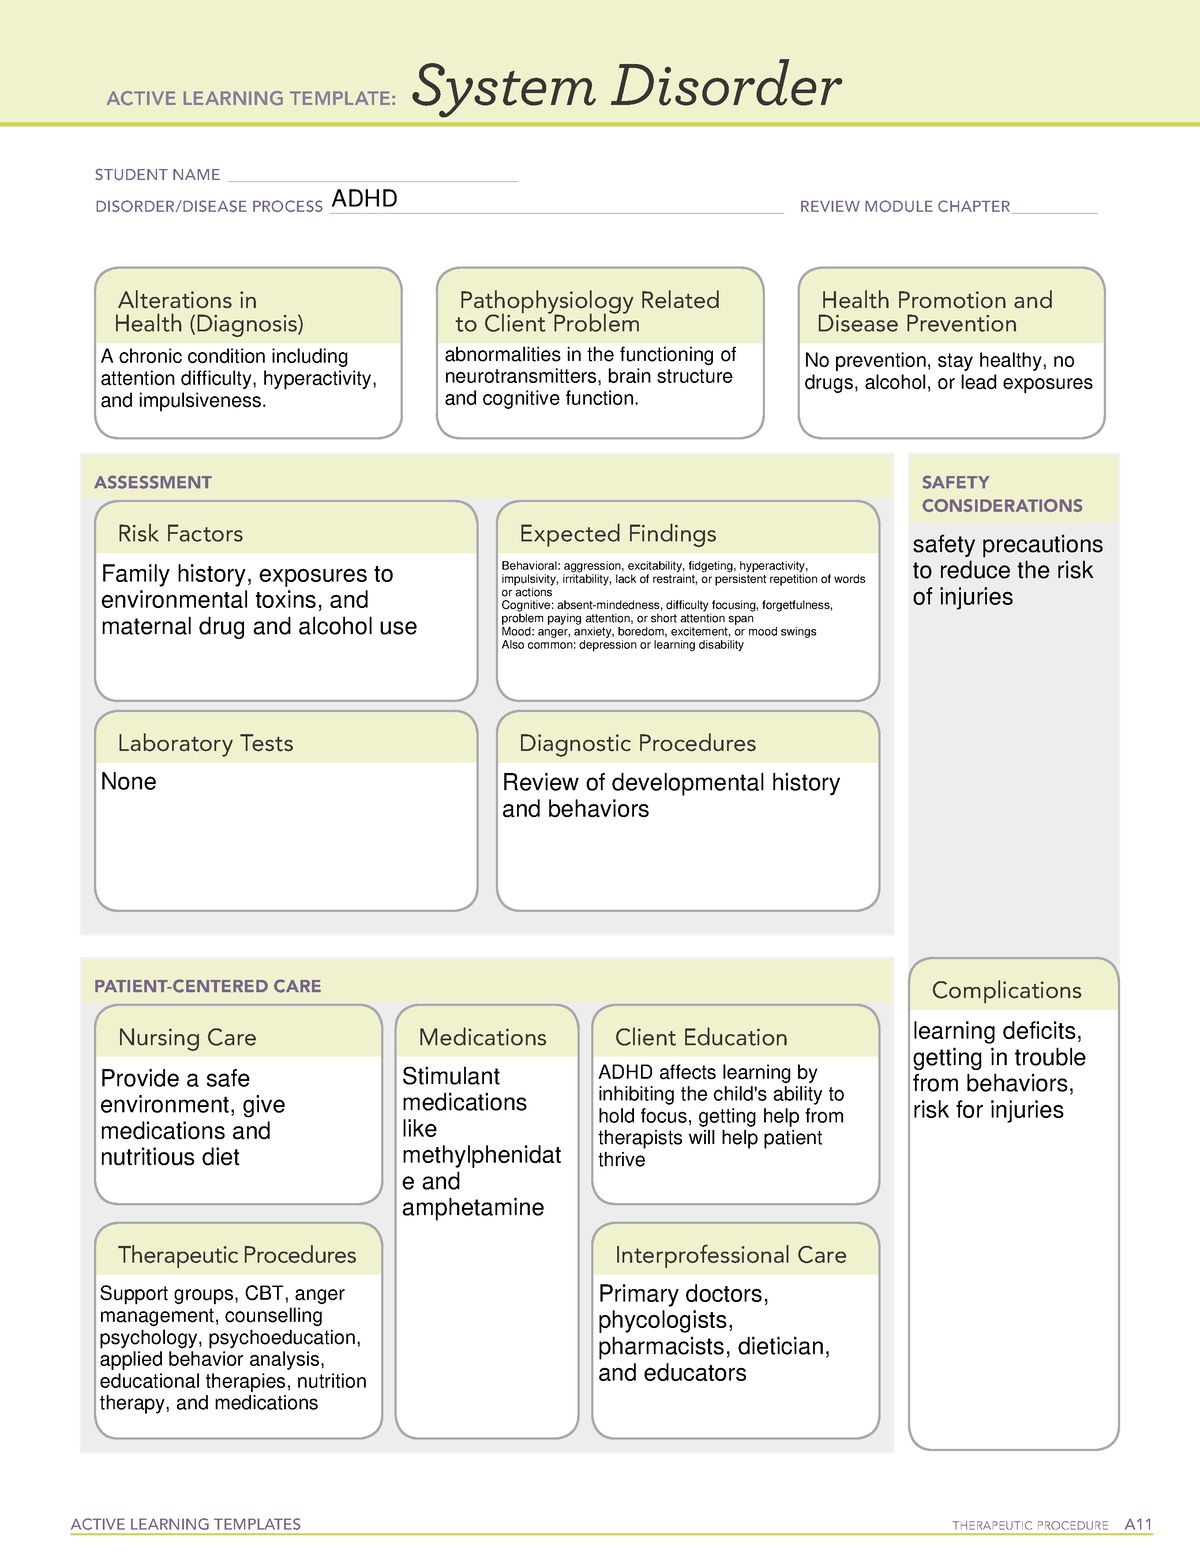 ADHD System Disorder Template ATI ACTIVE LEARNING TEMPLATE: System